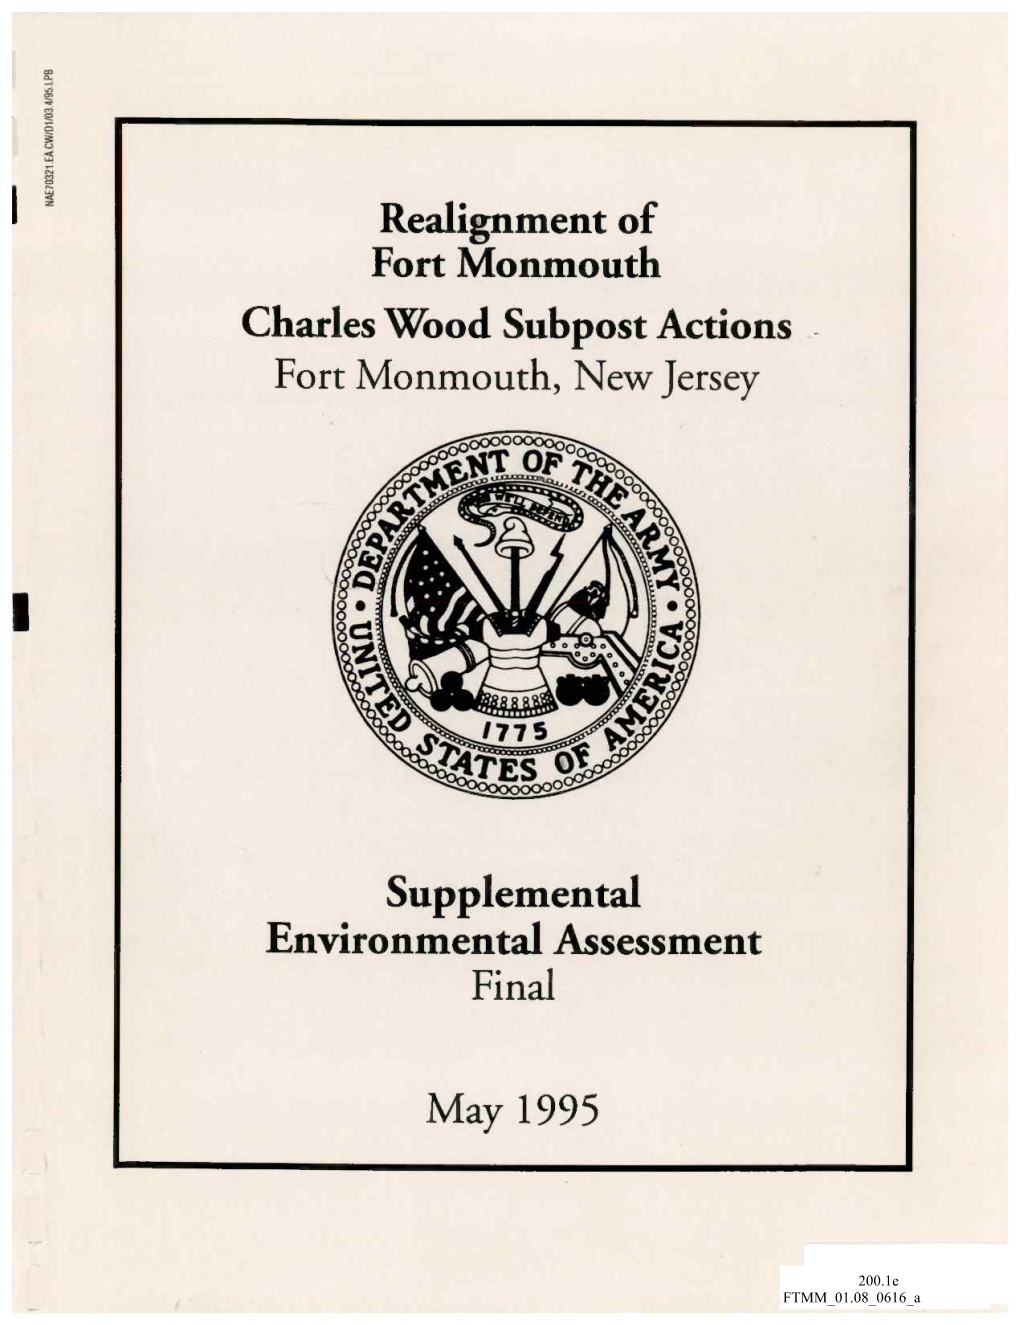 Charles Wood Subpost Actions Supplemental